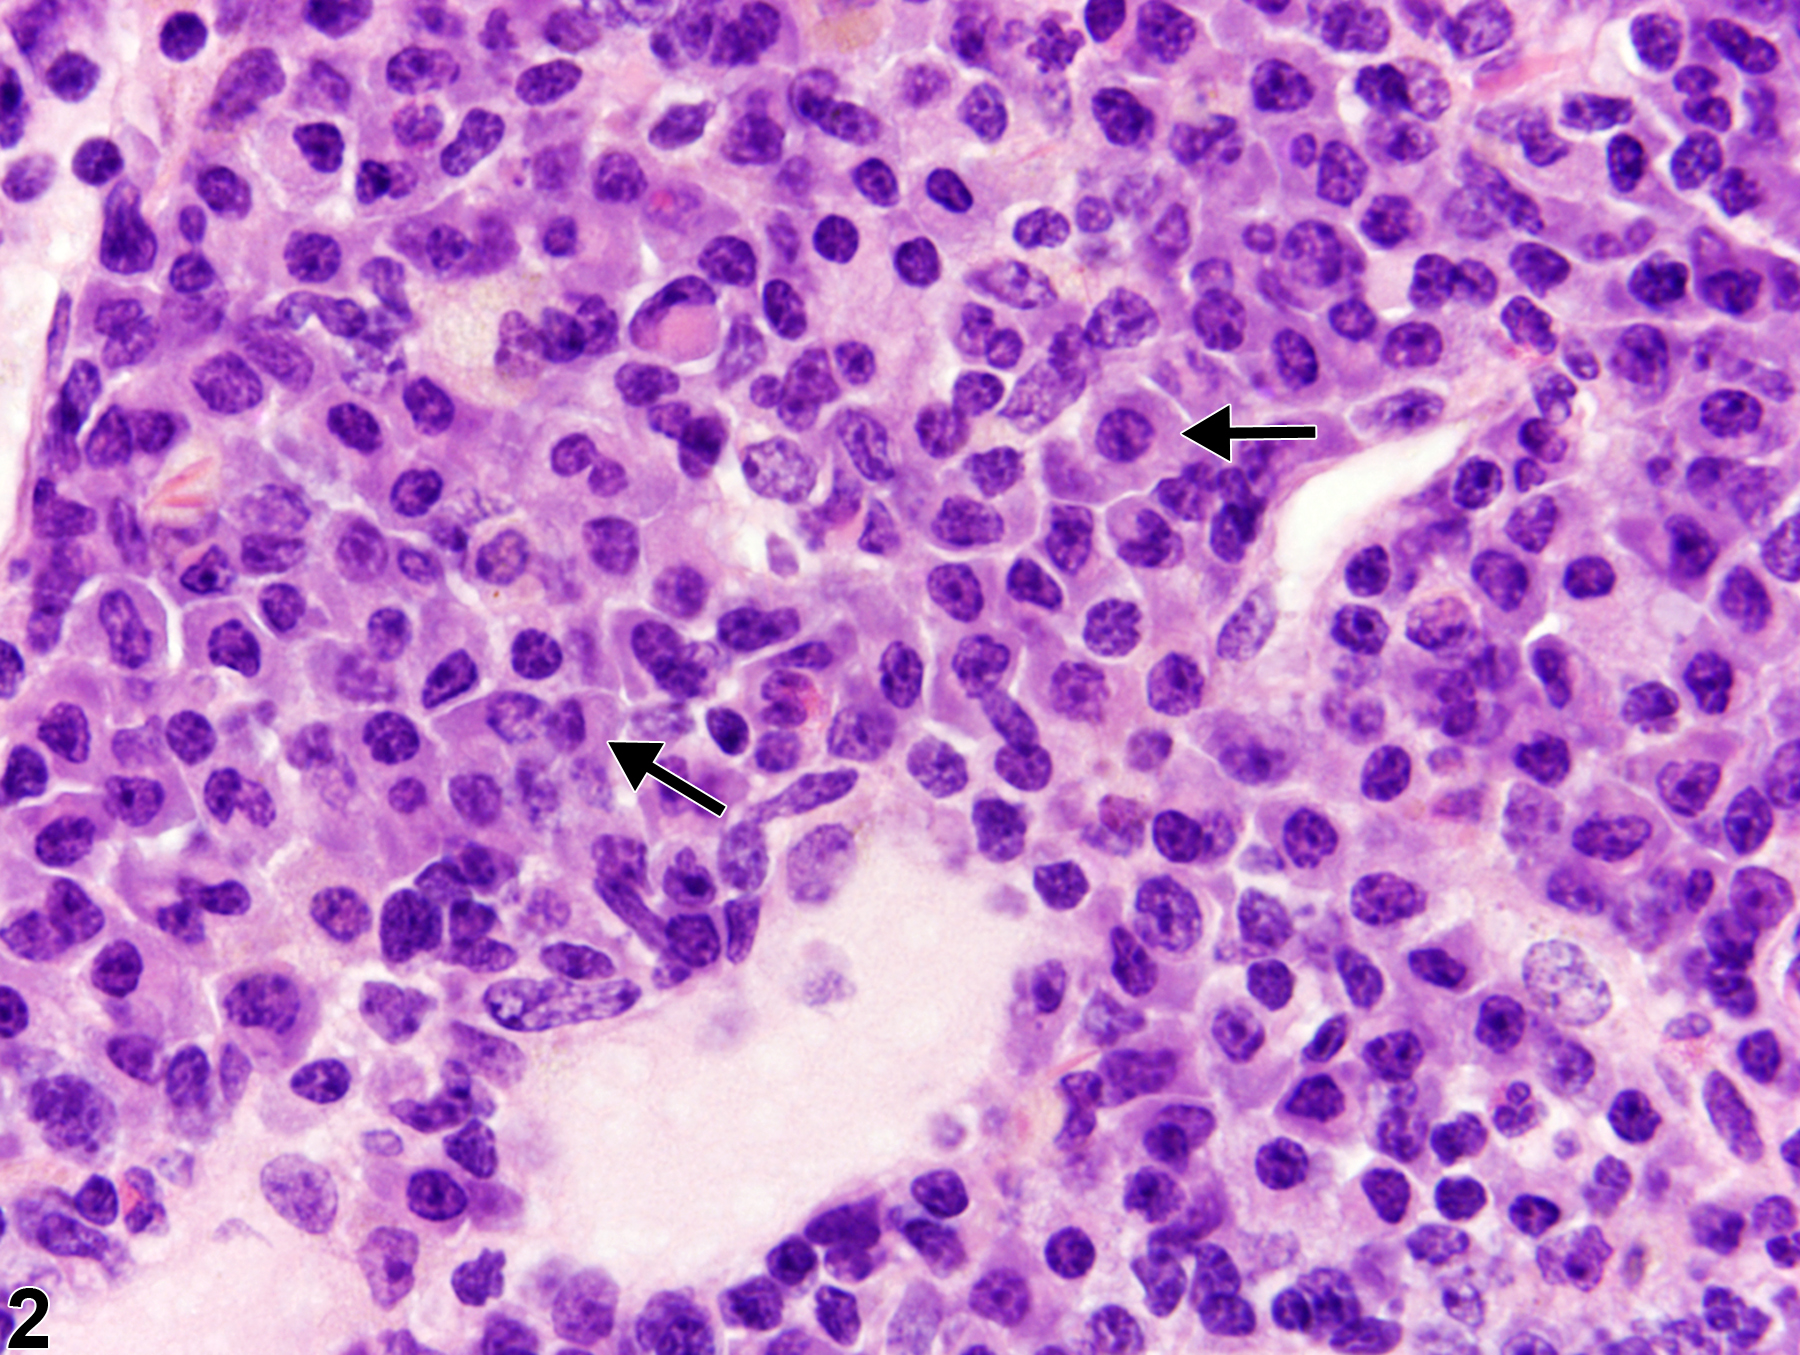 Image of hyperplasia, plasma cell in the lymph node from a female B6C3F1/N mouse in a chronic study